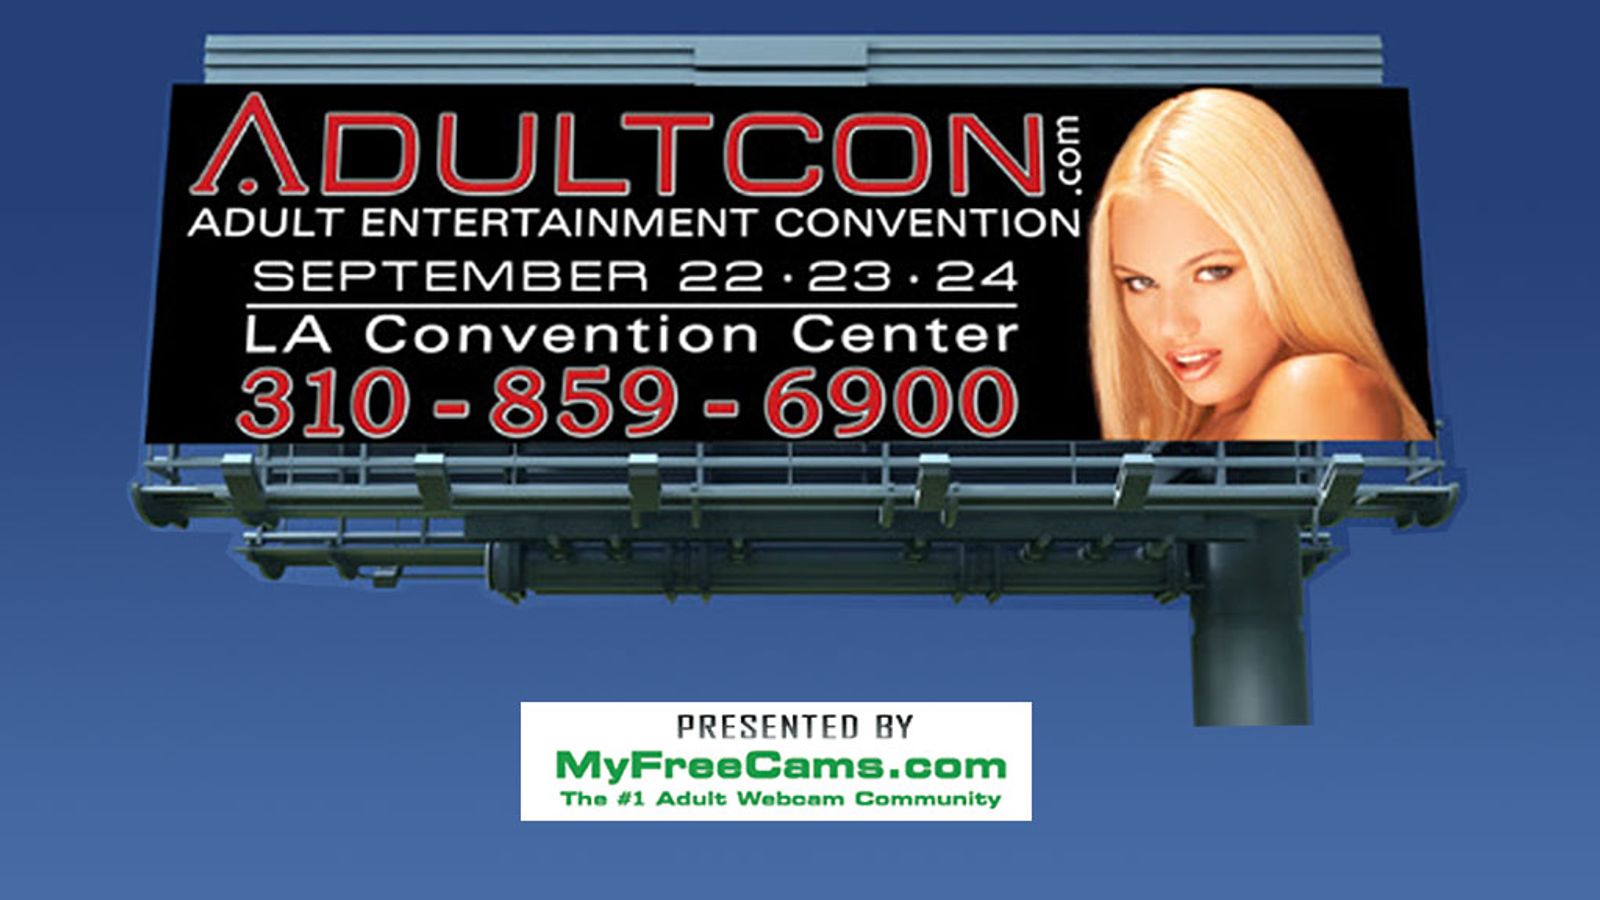 Adultcon Comes Back To LA Convention Center September 22-24